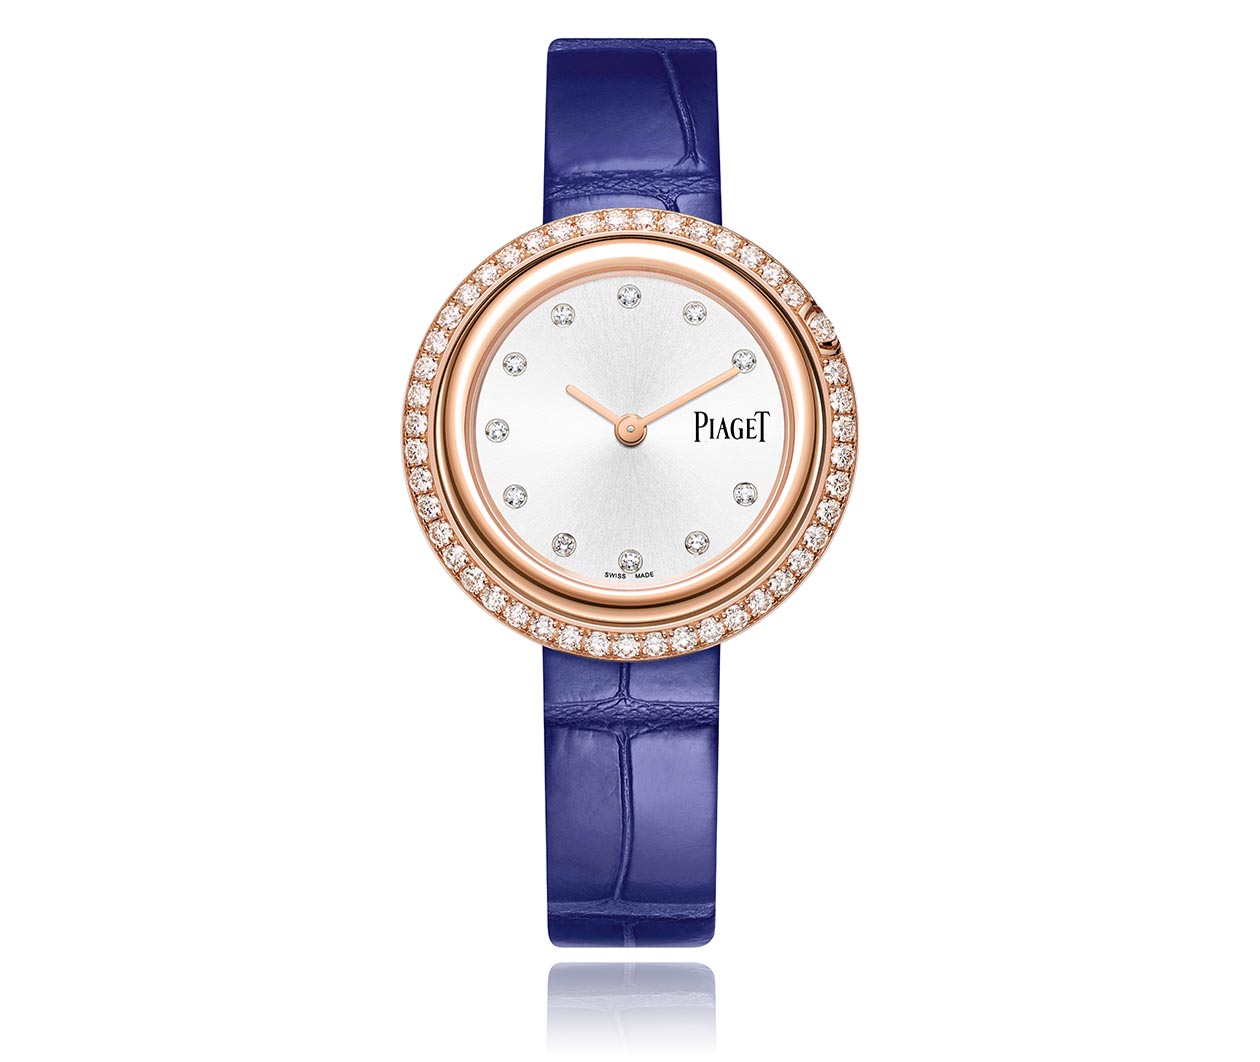 Piaget Possession watch G0A43092 Carousel 1 FINAL